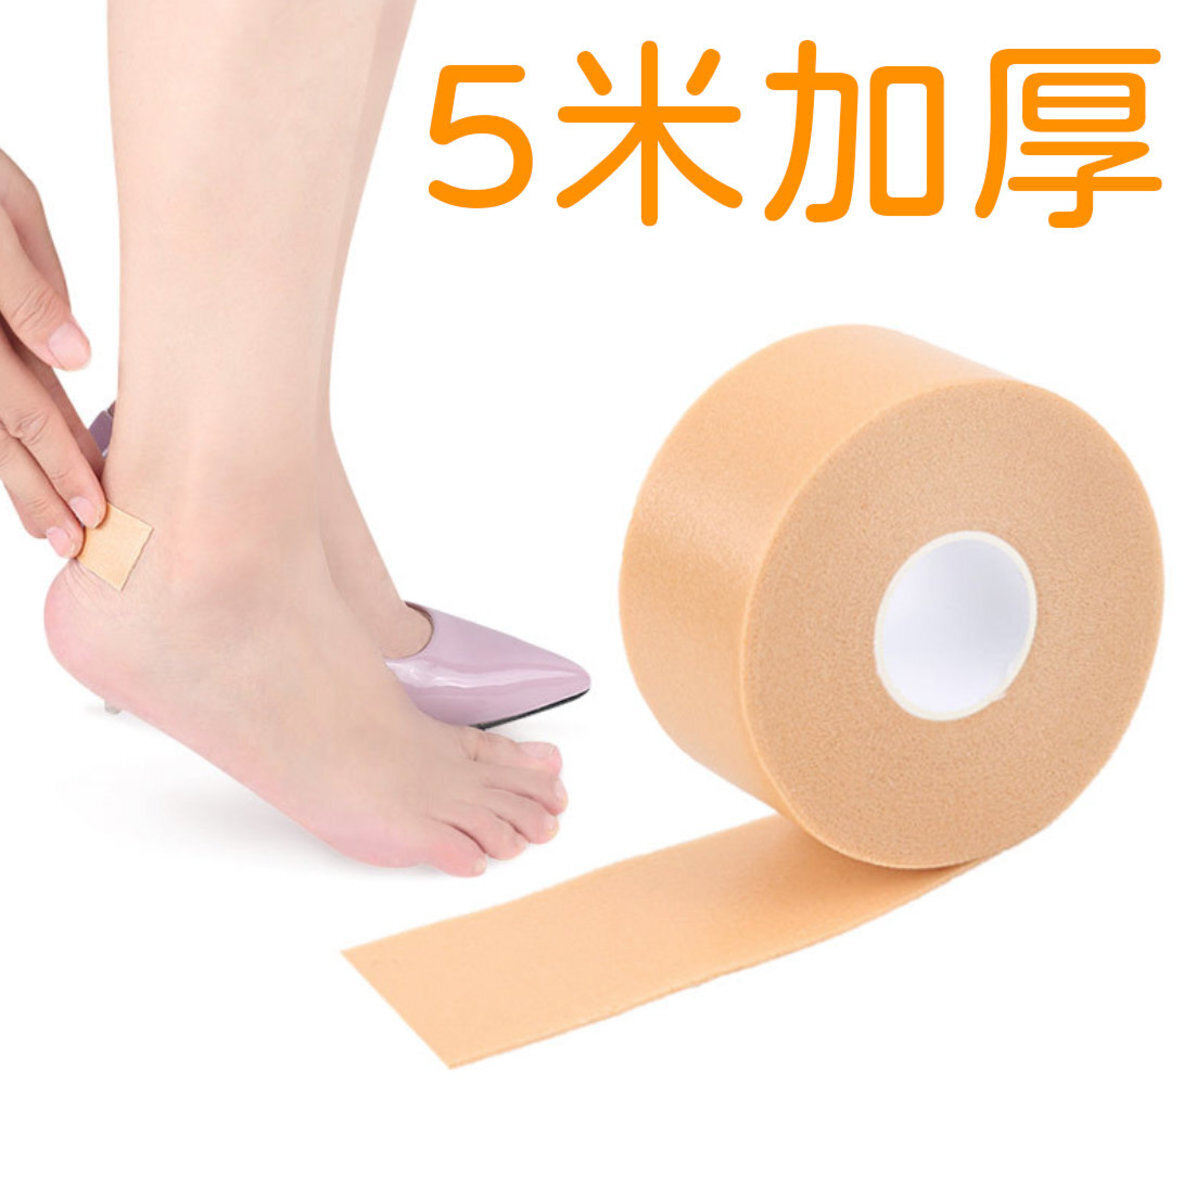 Heel Grip Tape Foot Care Sticker Heel and Ankle Wrist Strap Self-Adhesive Wear-Resistant Stickers